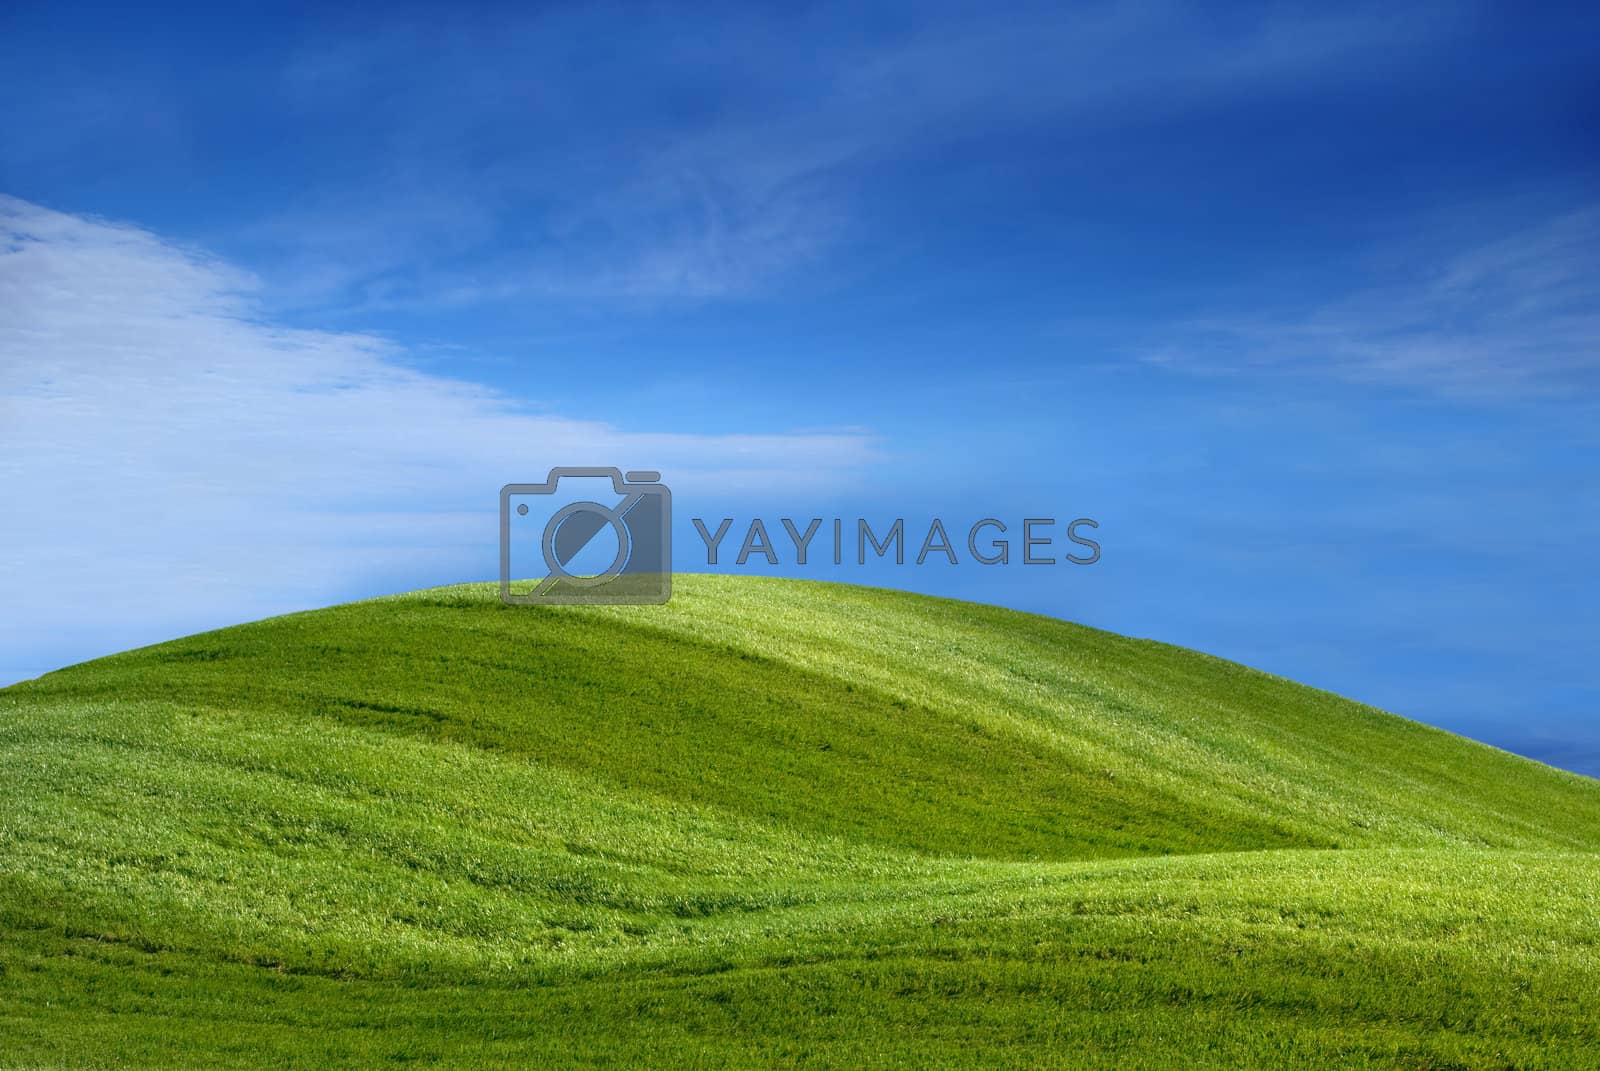 Royalty free image of Grass by BVDC